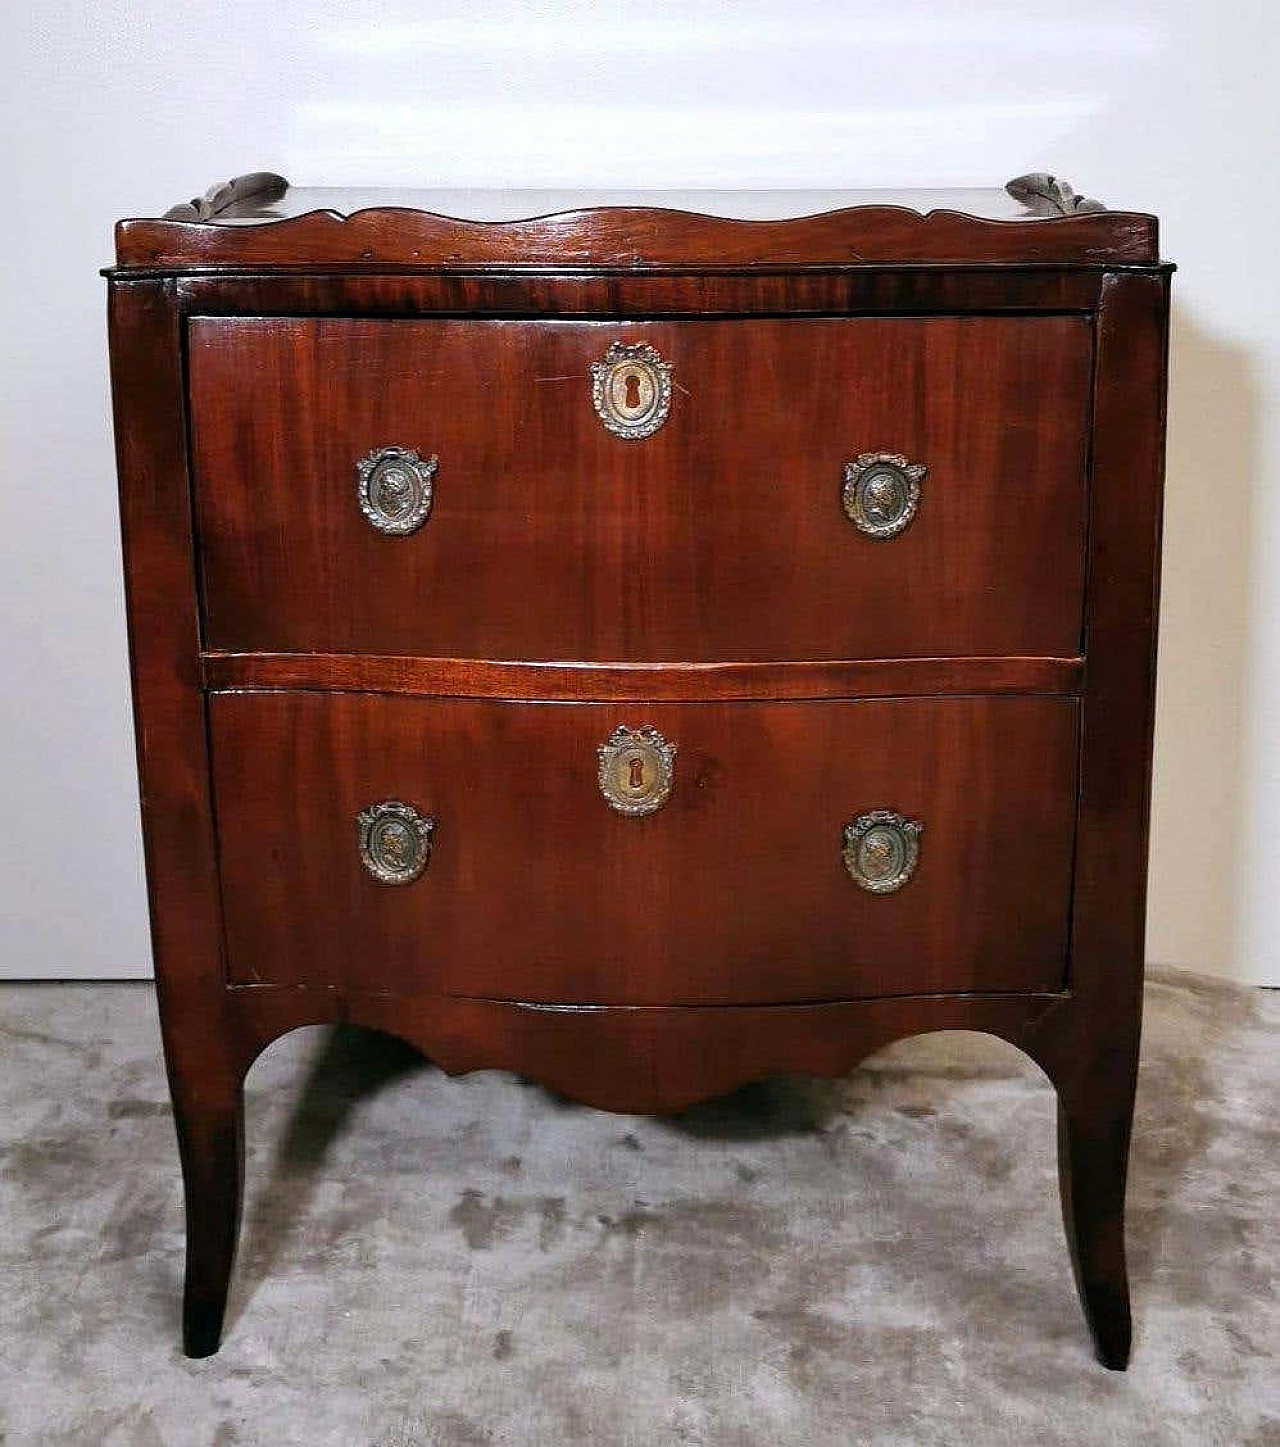 Neoclassical style chest of drawers in mahogany with bronze decorations, 18th century 1332966